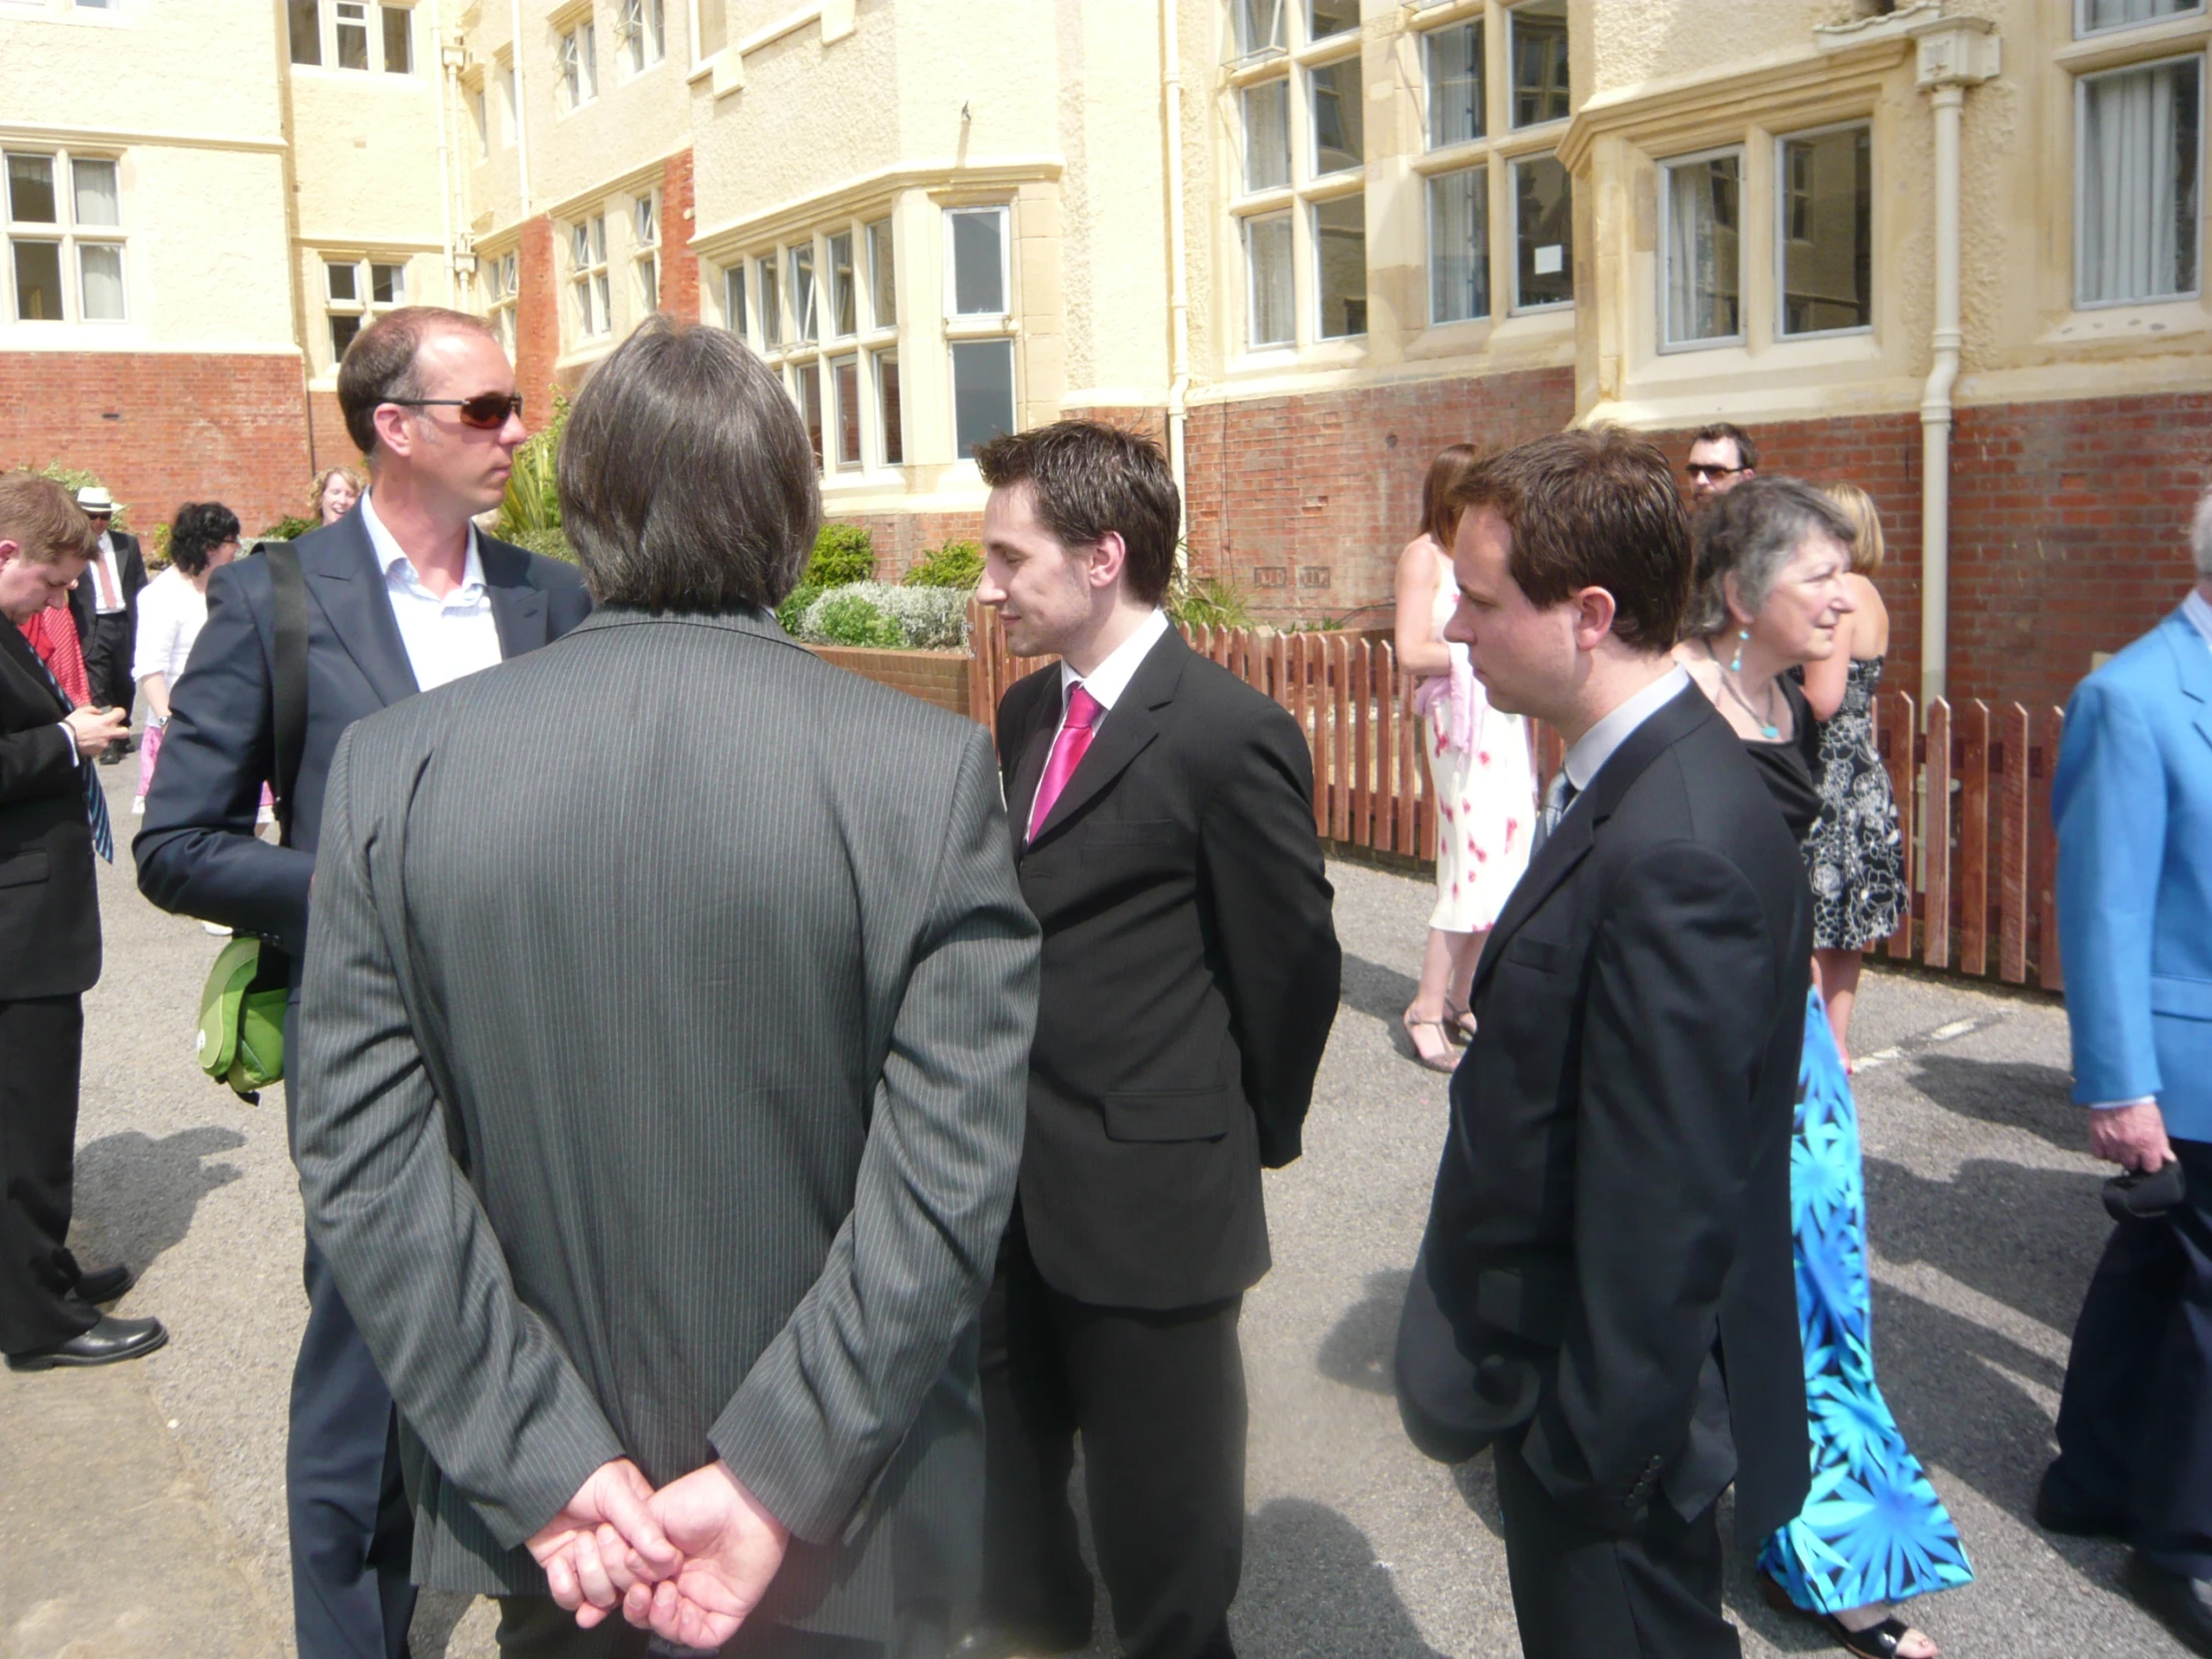 a group of men are in suits walking towards a building